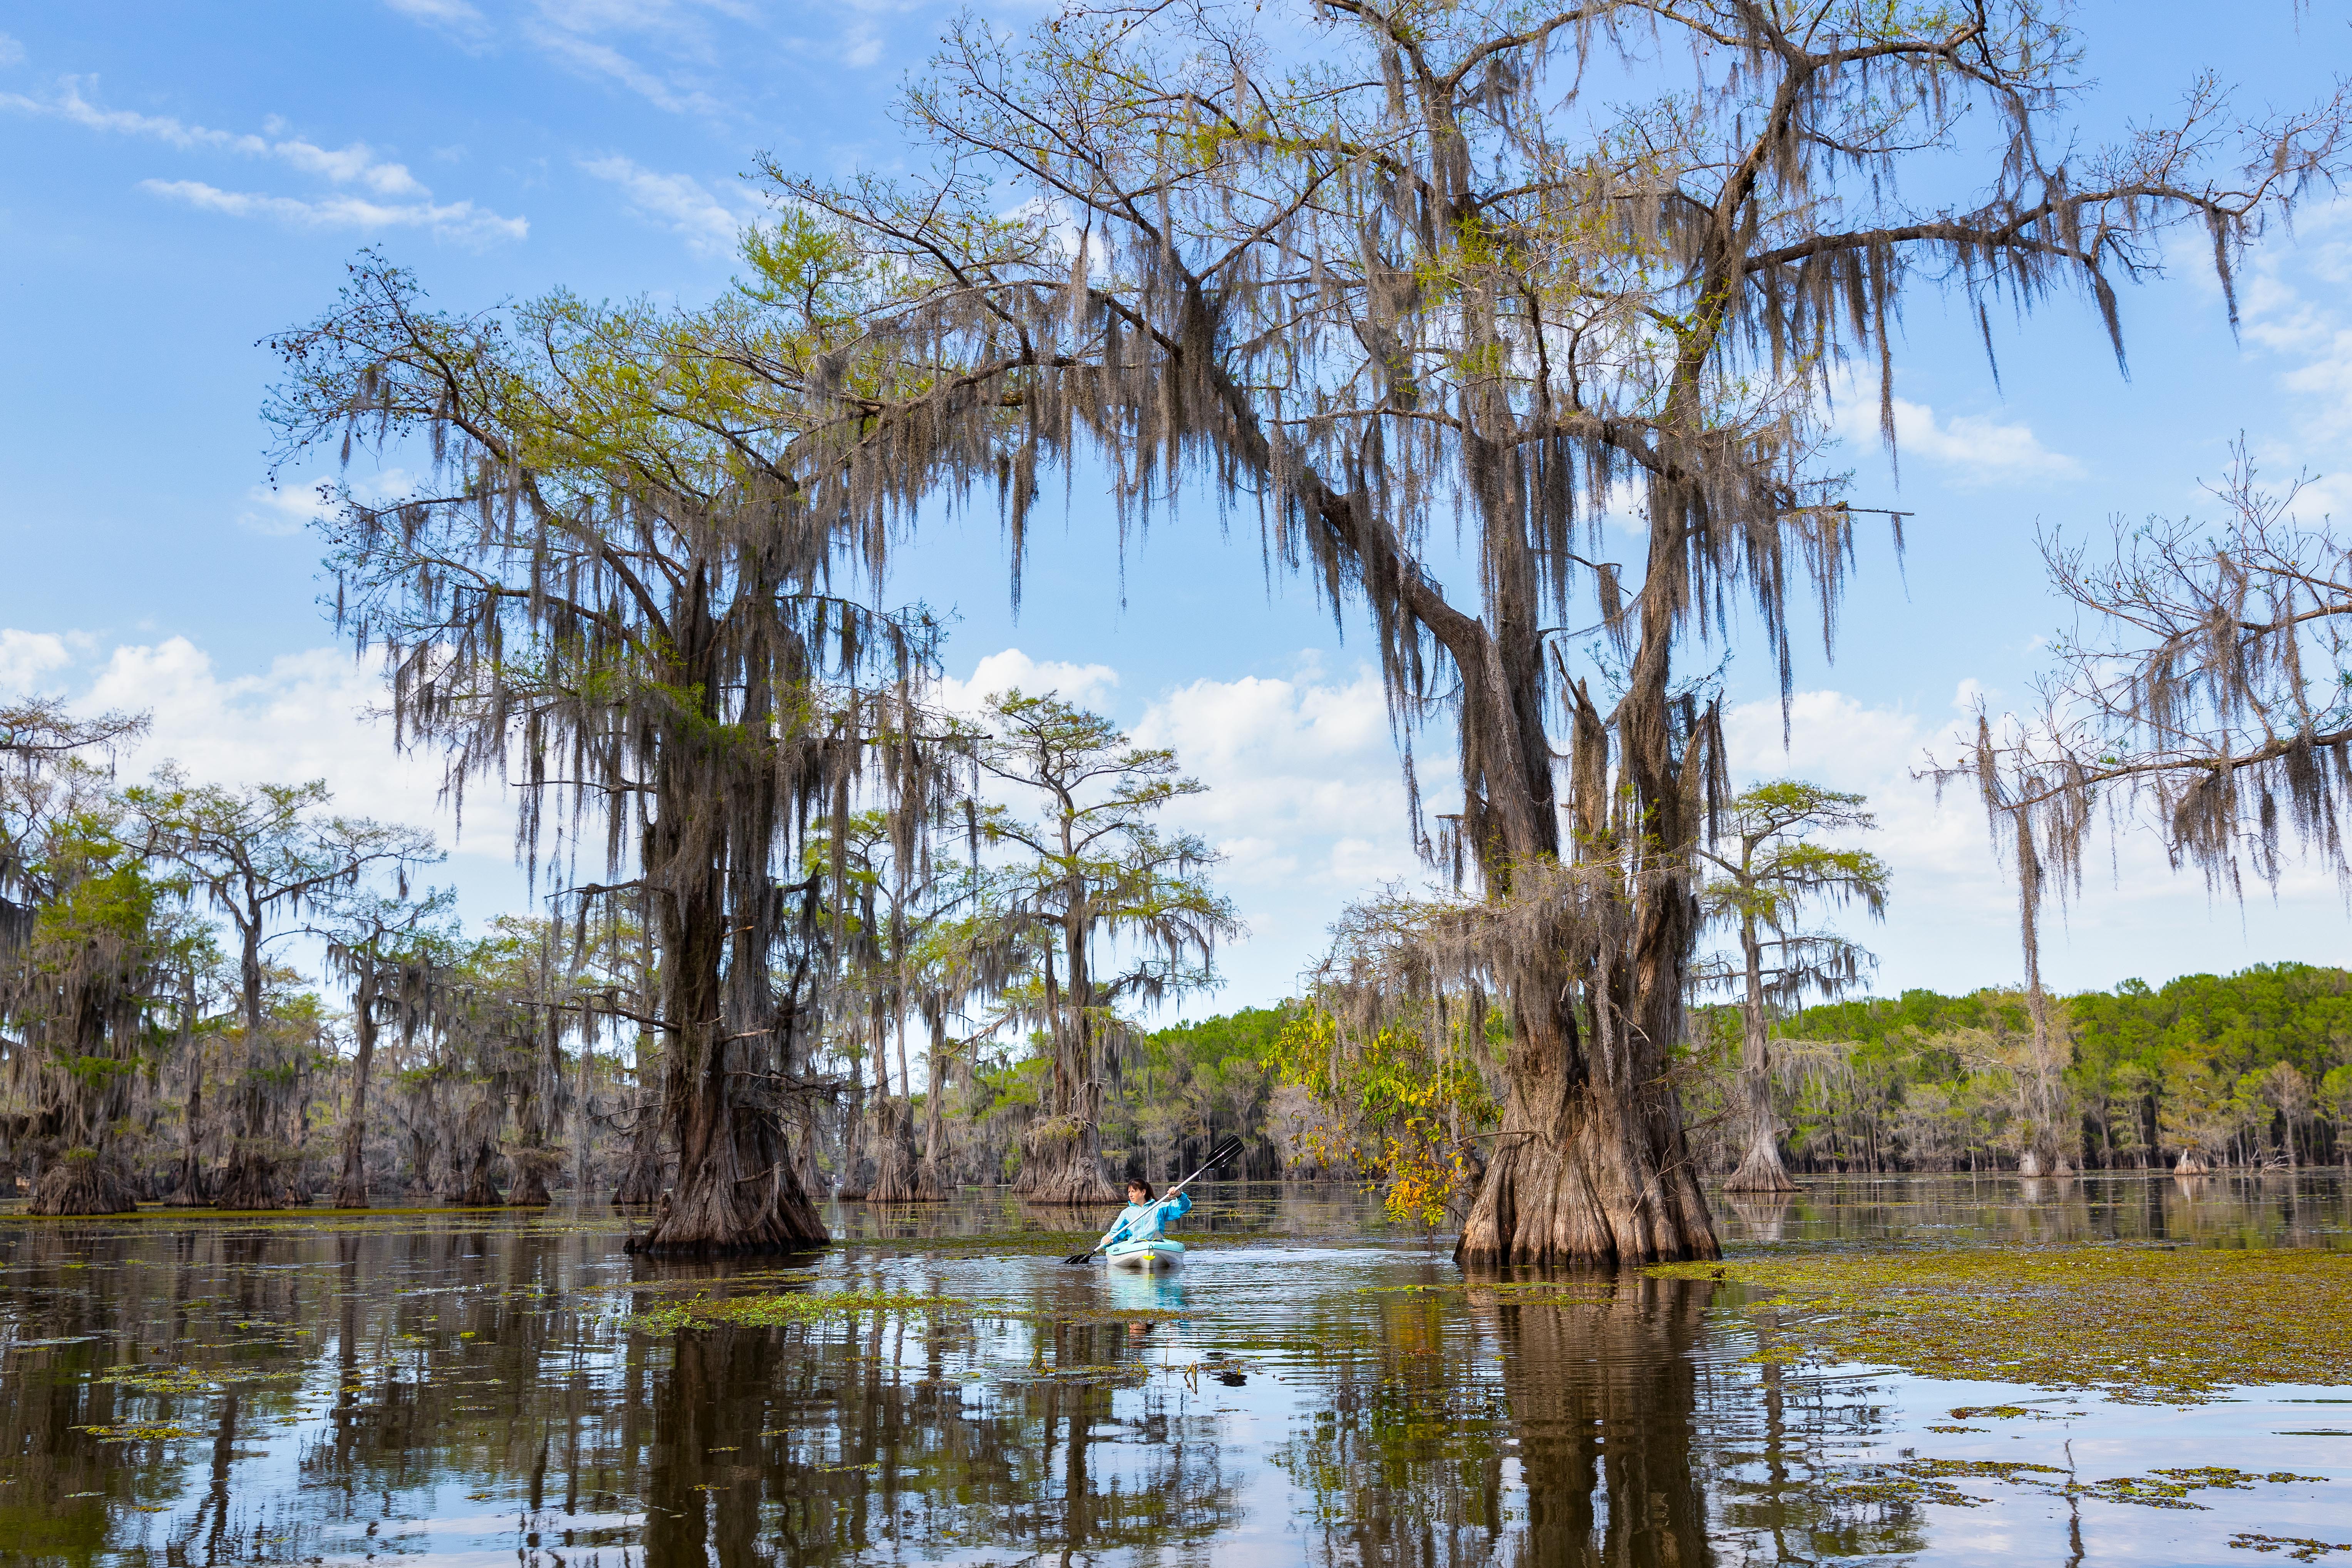 A cypress tree covered in moss hangs over a kayaker.